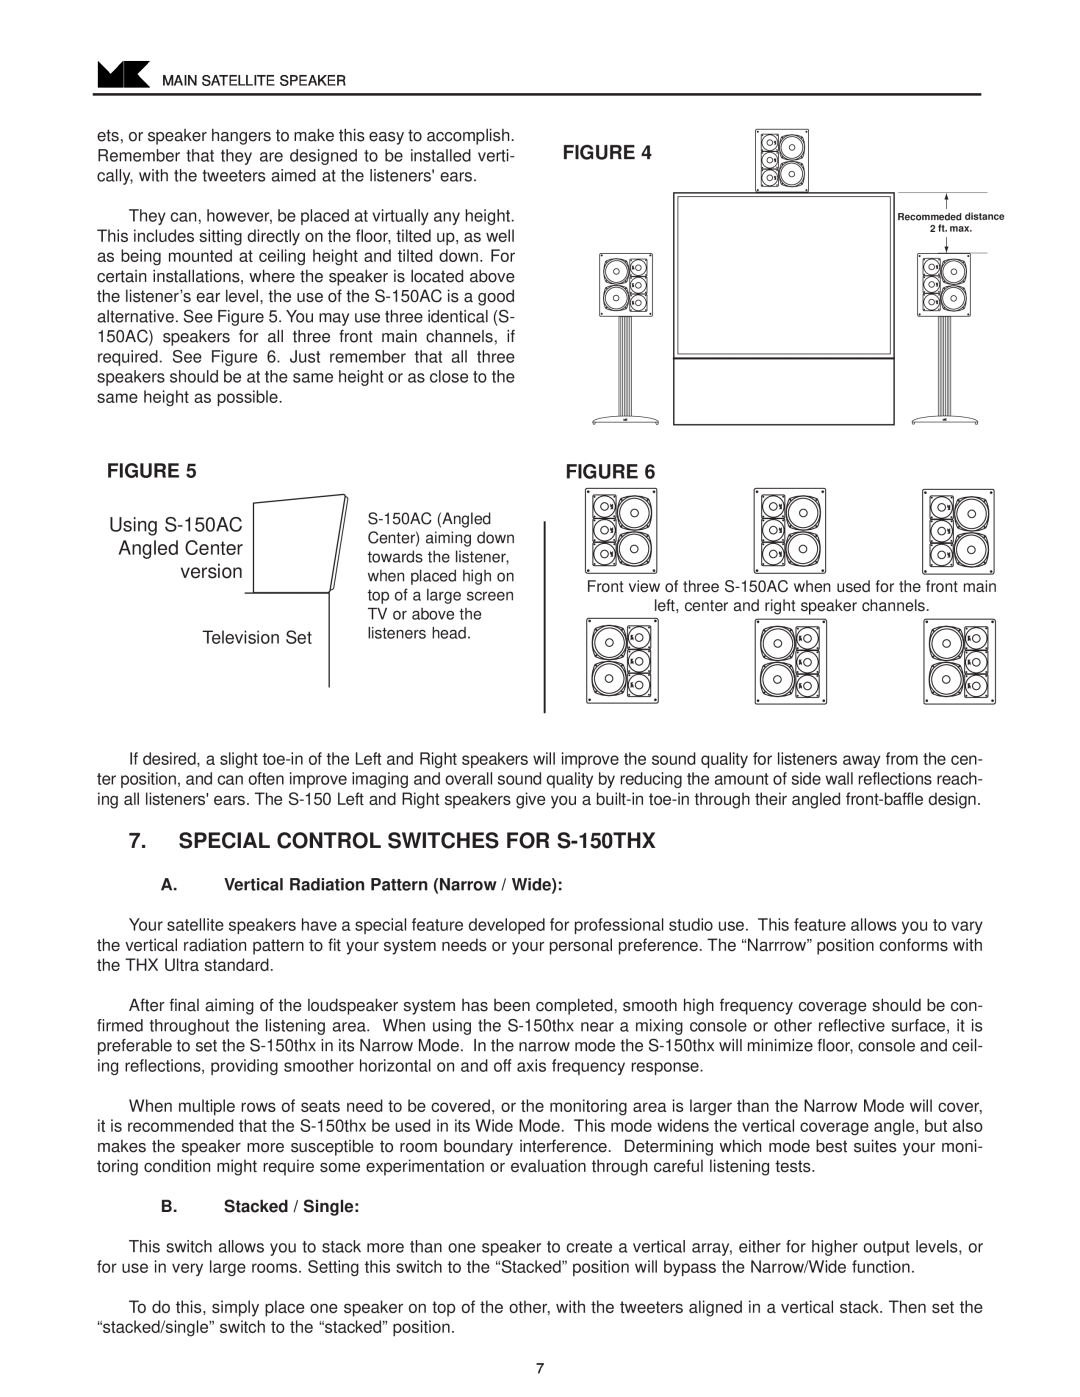 MK Sound S-250 SPECIAL CONTROL SWITCHES FOR S-150THX, A.Vertical Radiation Pattern Narrow / Wide, B.Stacked / Single 